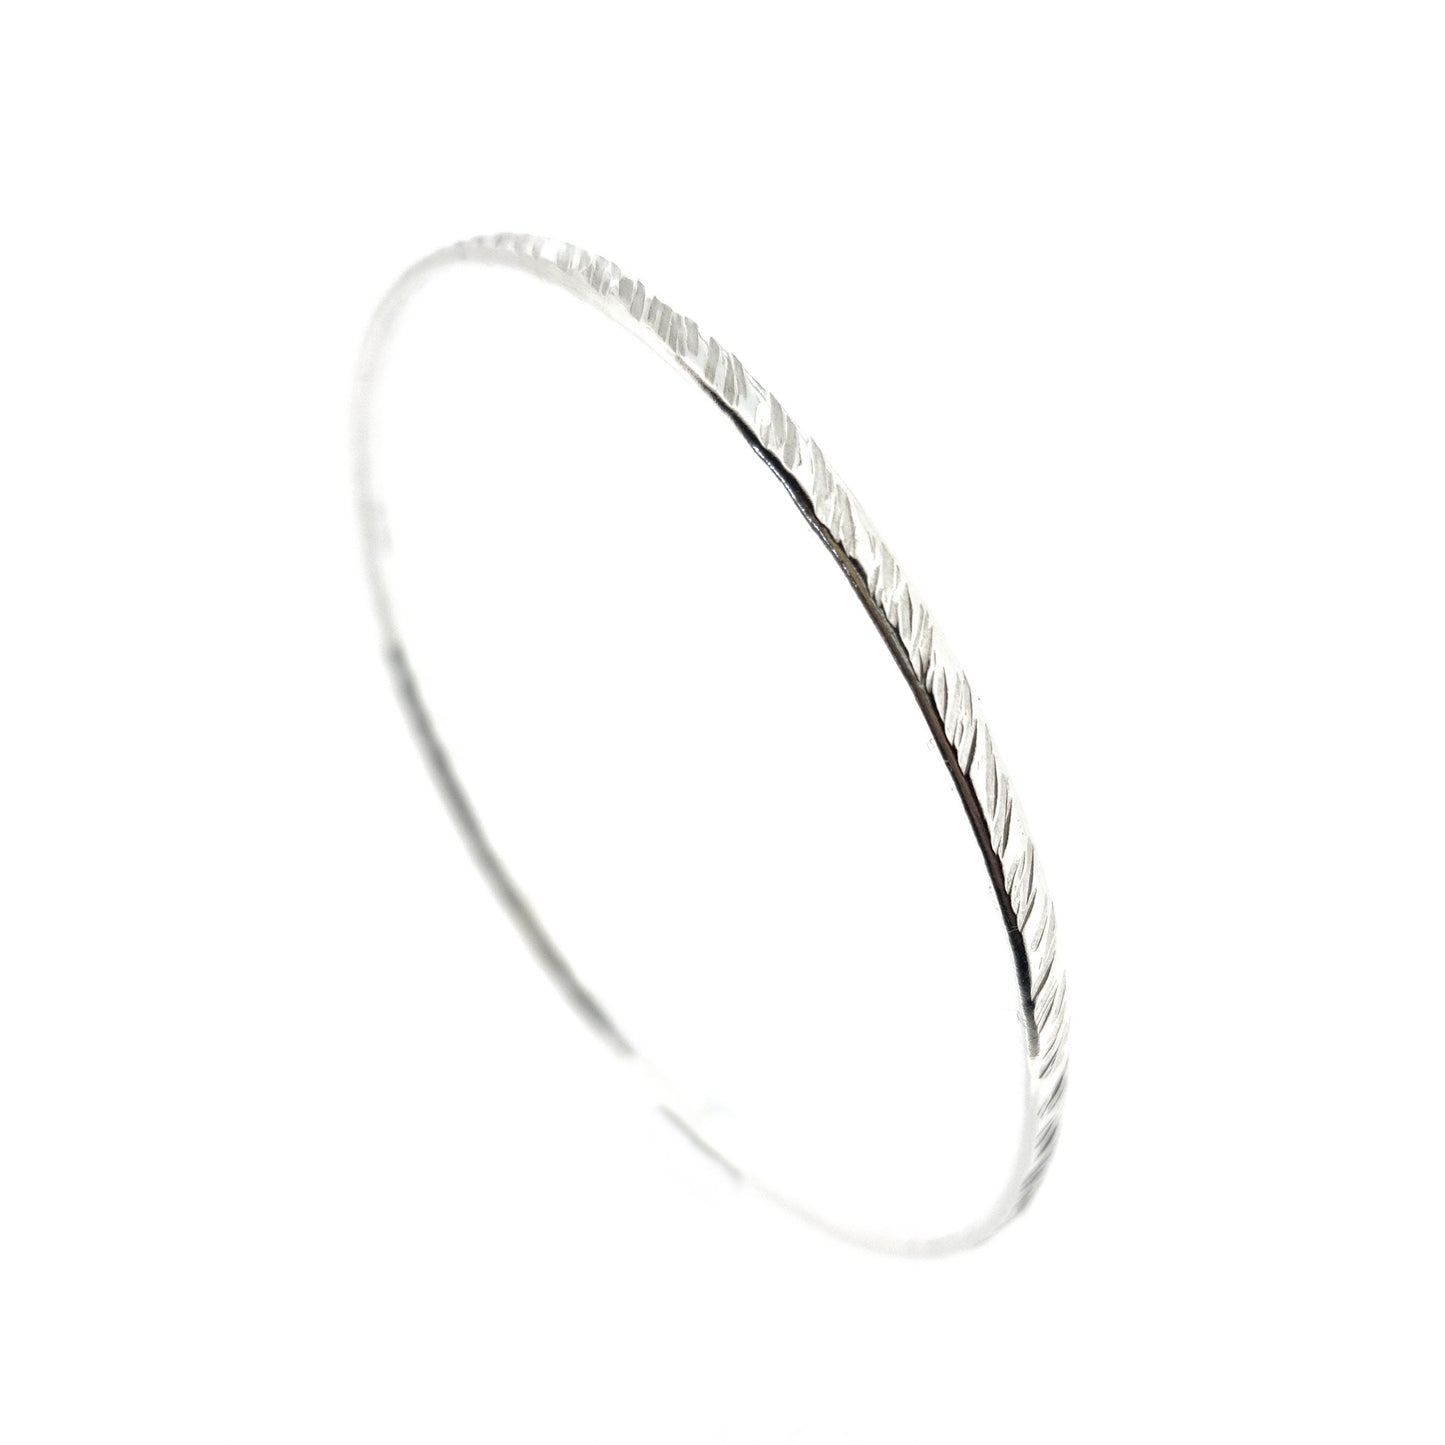 A silver round bangle with a diagonal rustic lined texture.